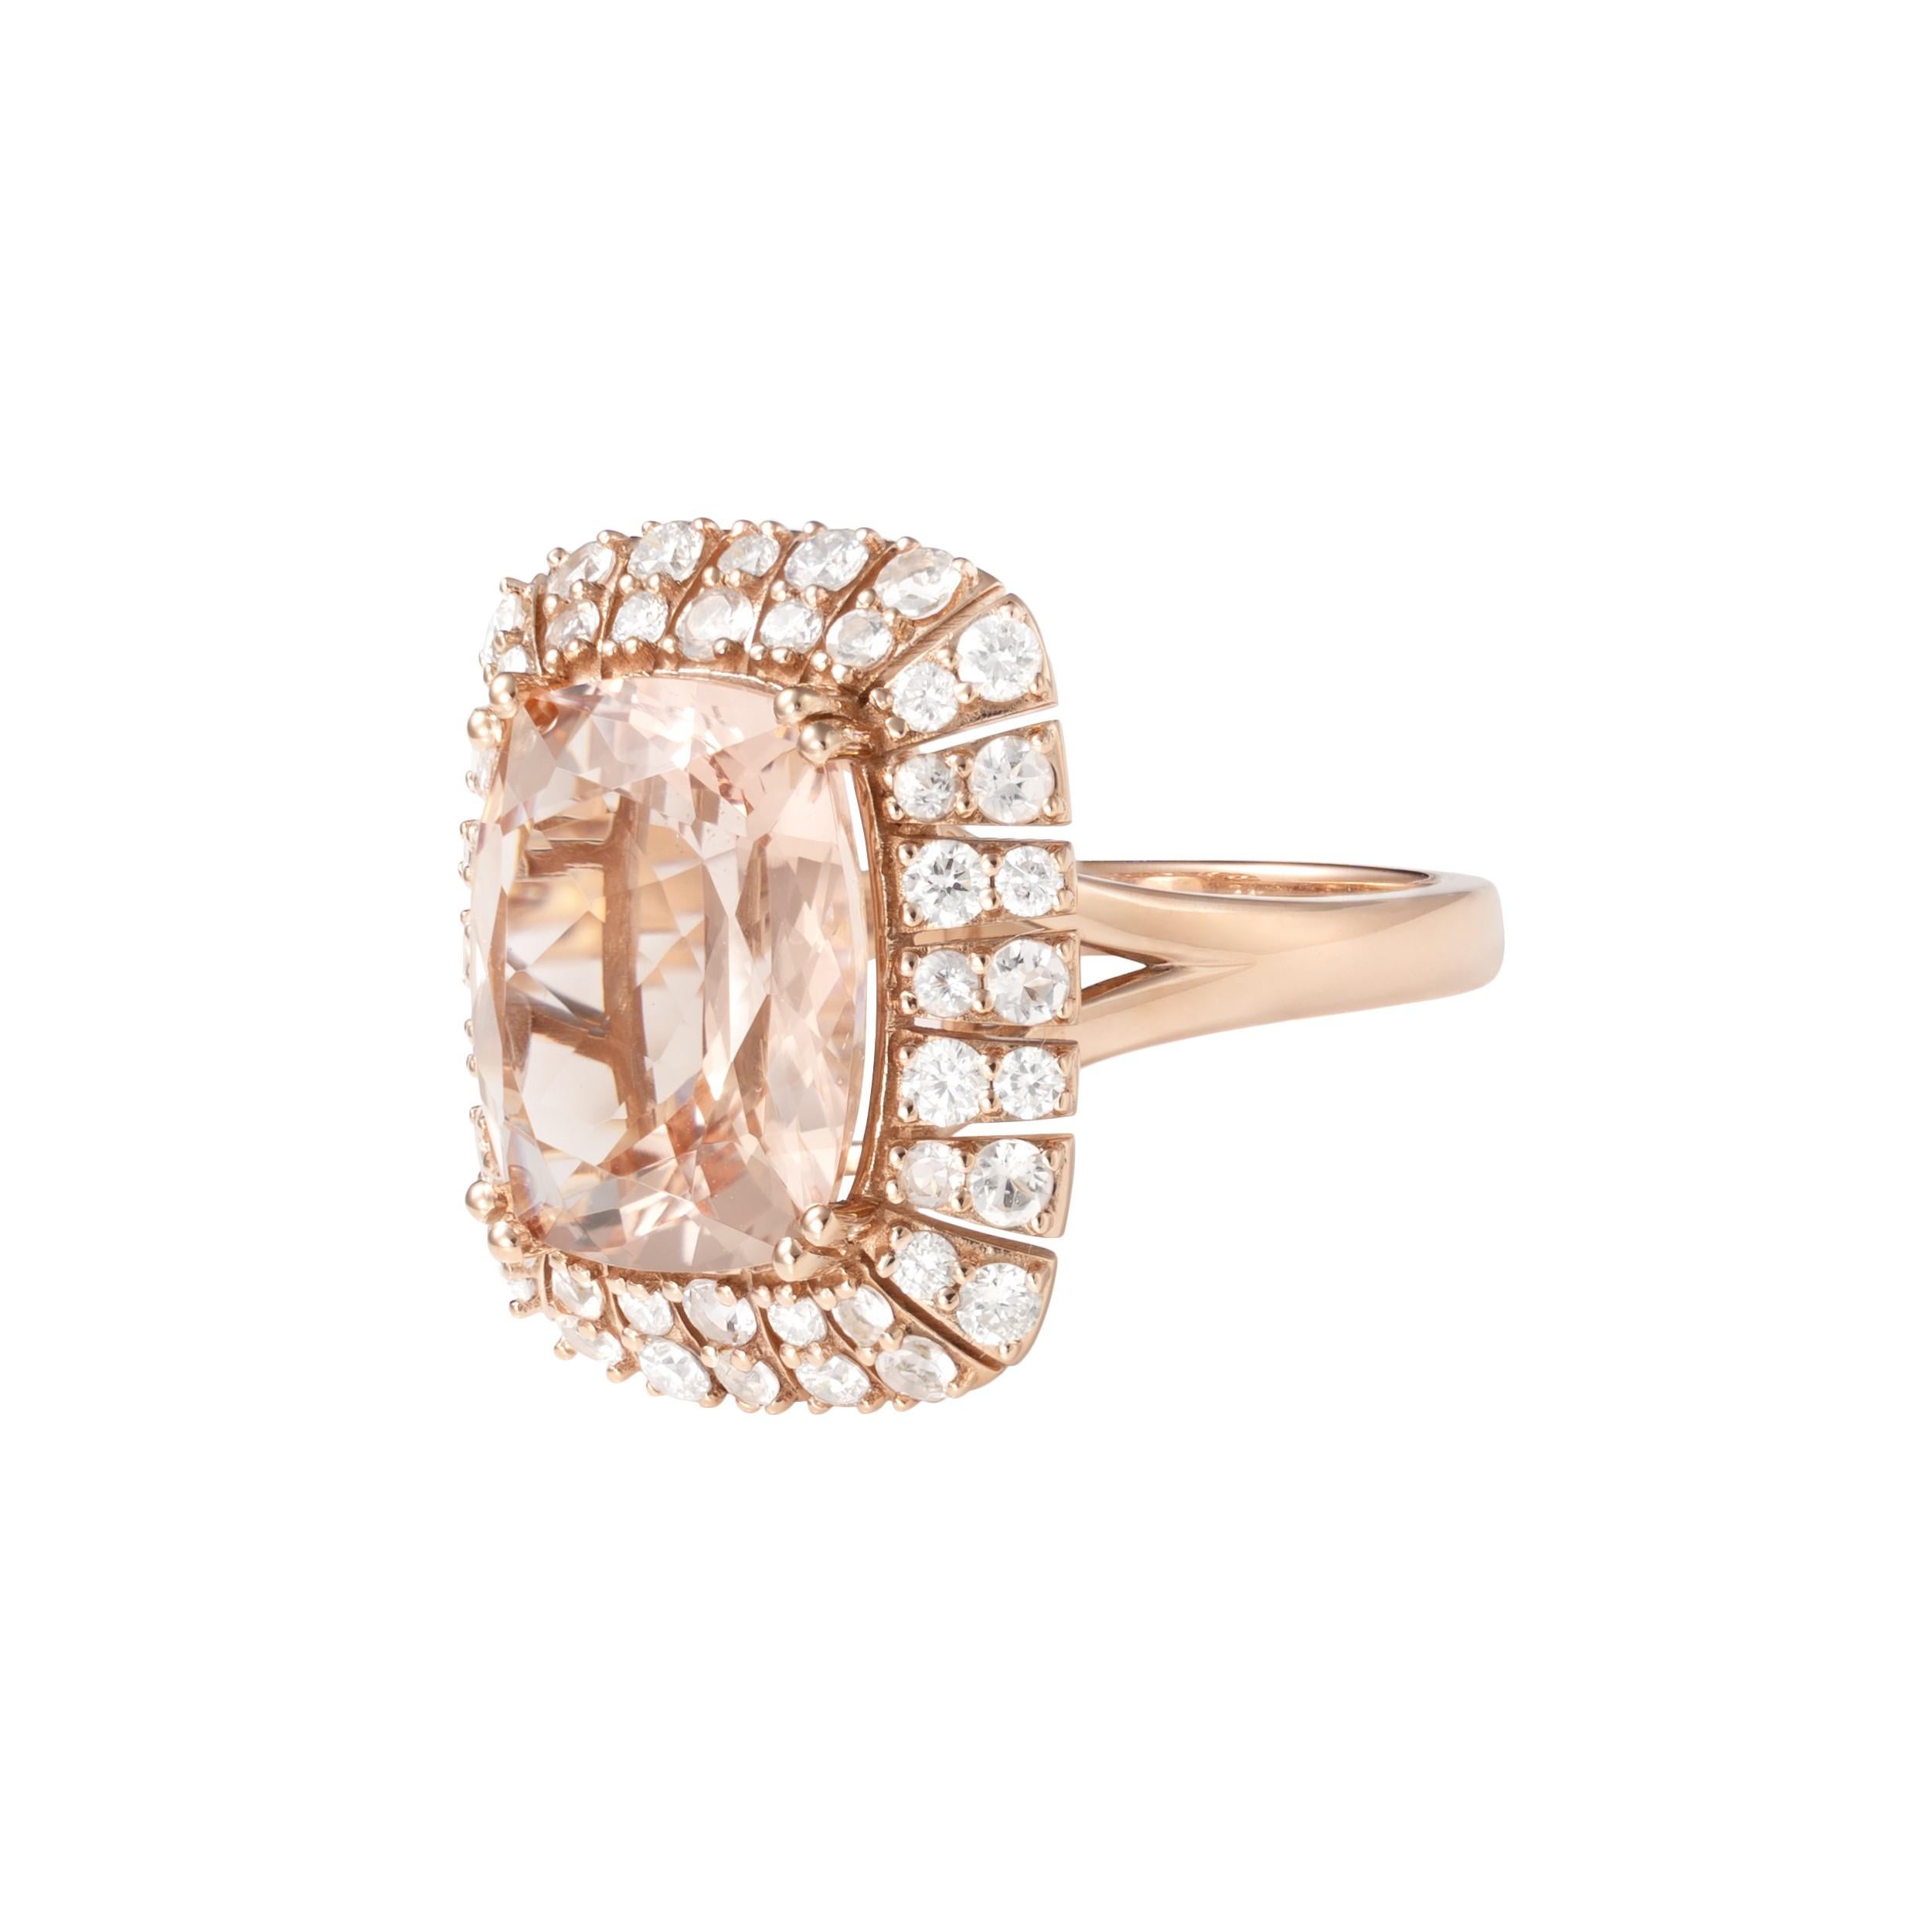 Contemporary 7.71 Carat Morganite and Diamond Ring in 18 Karat Rose Gold For Sale